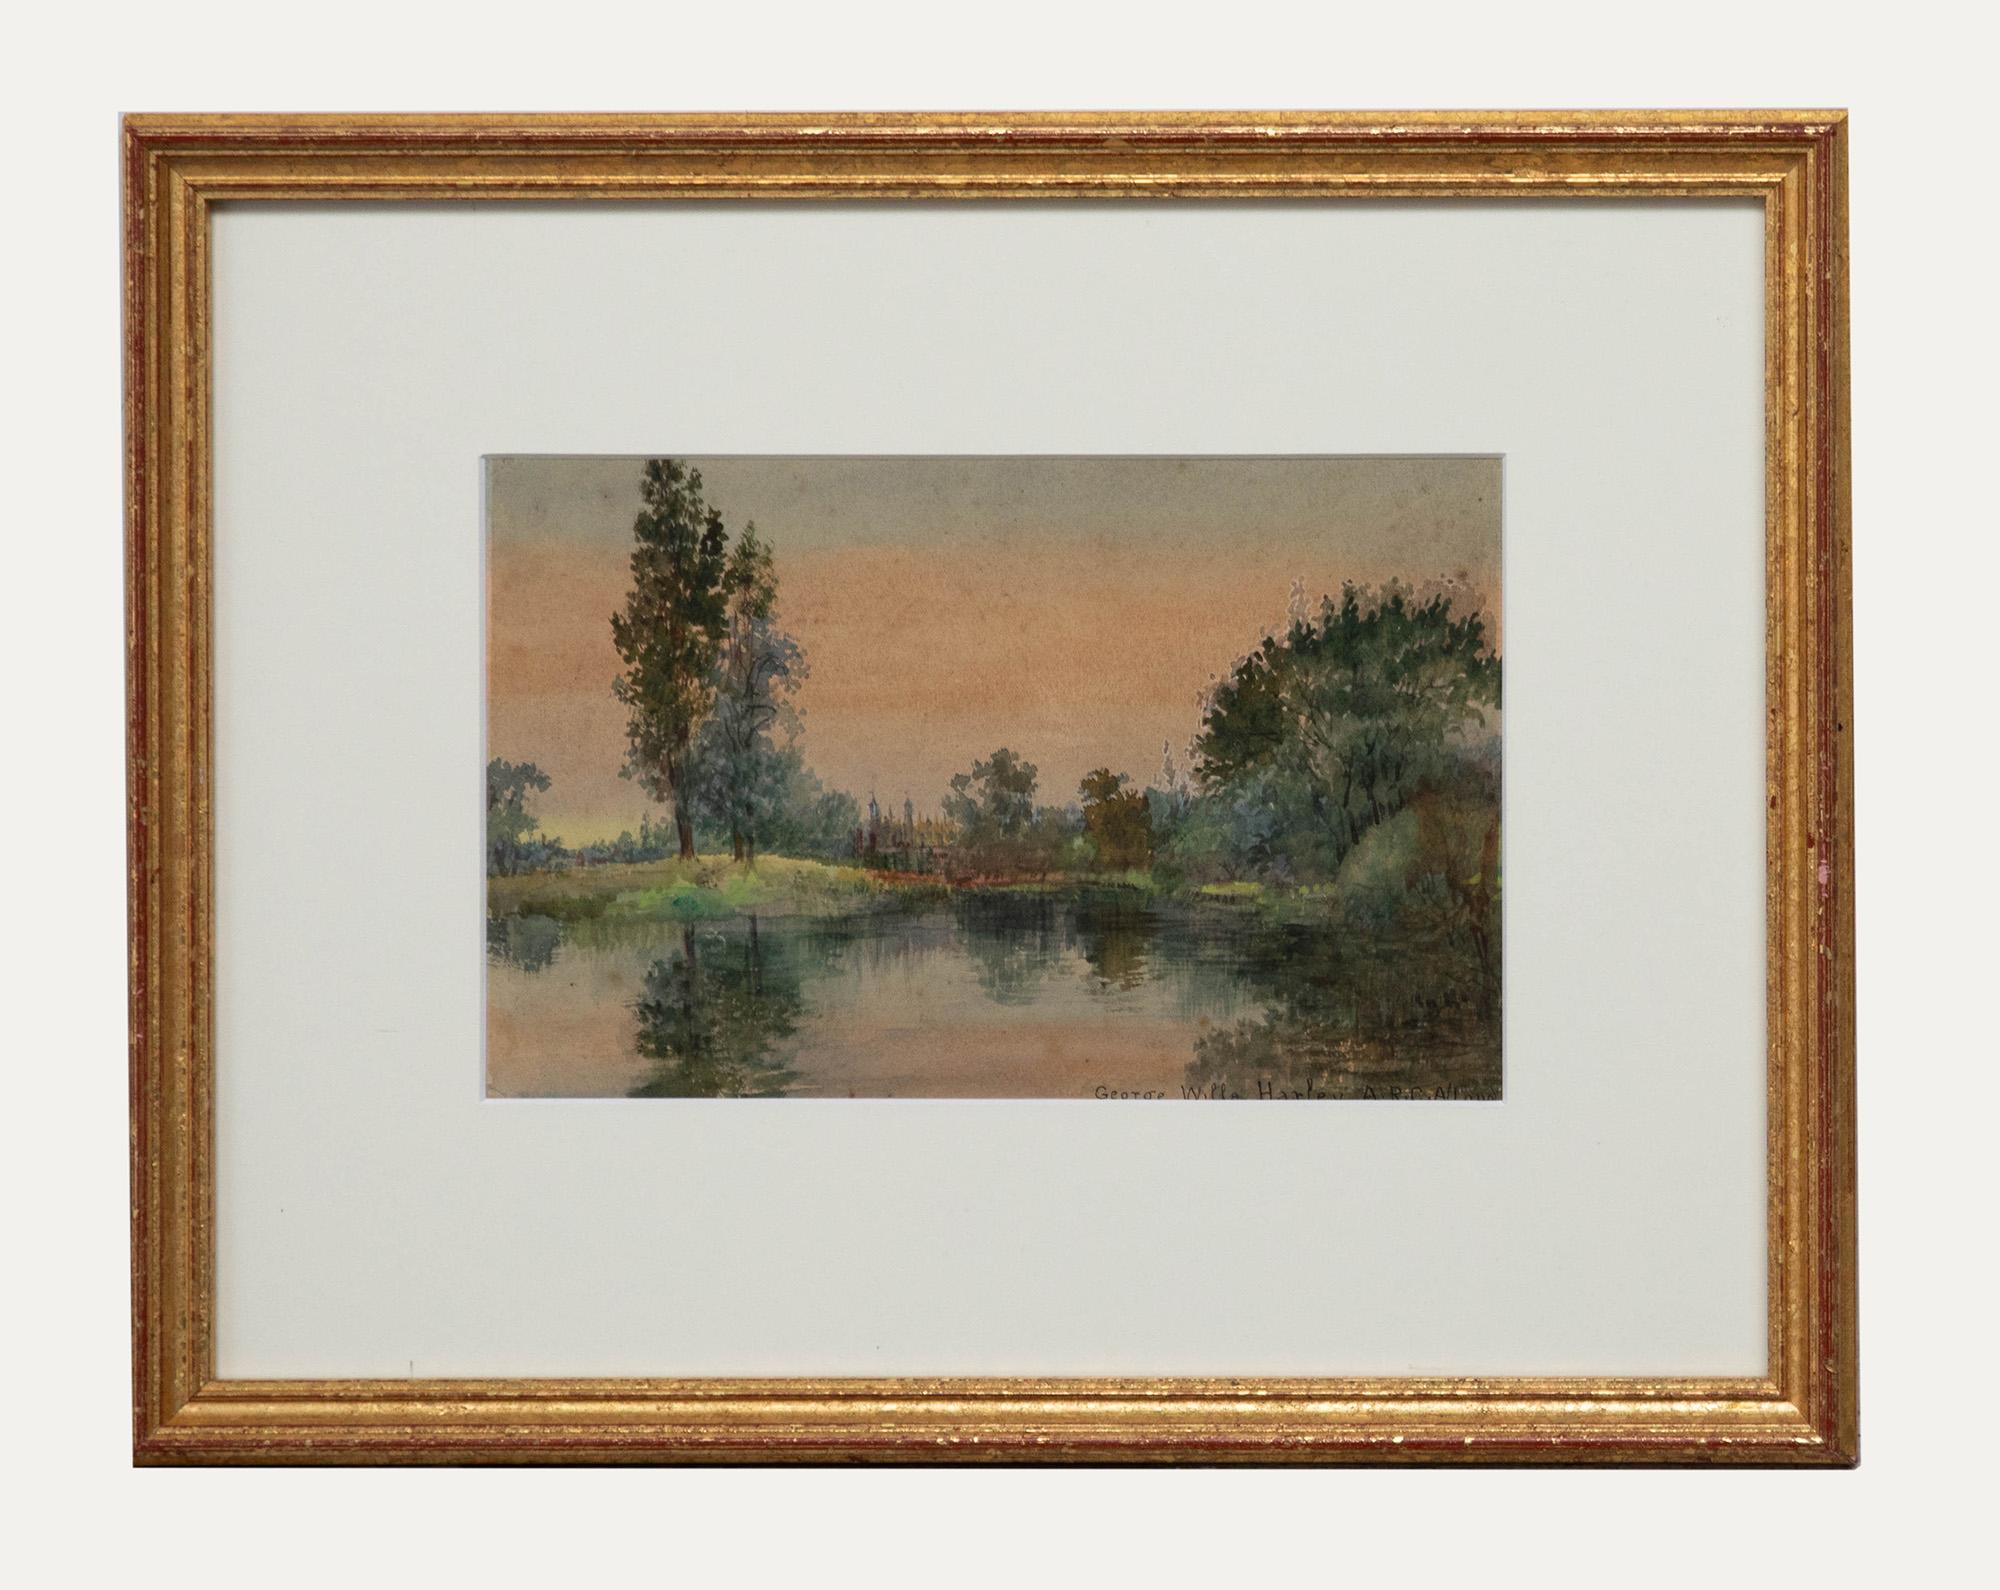 Unknown Landscape Art - George Wills Harley (fl.1900-1909)- Framed Watercolour, A View of Eton College